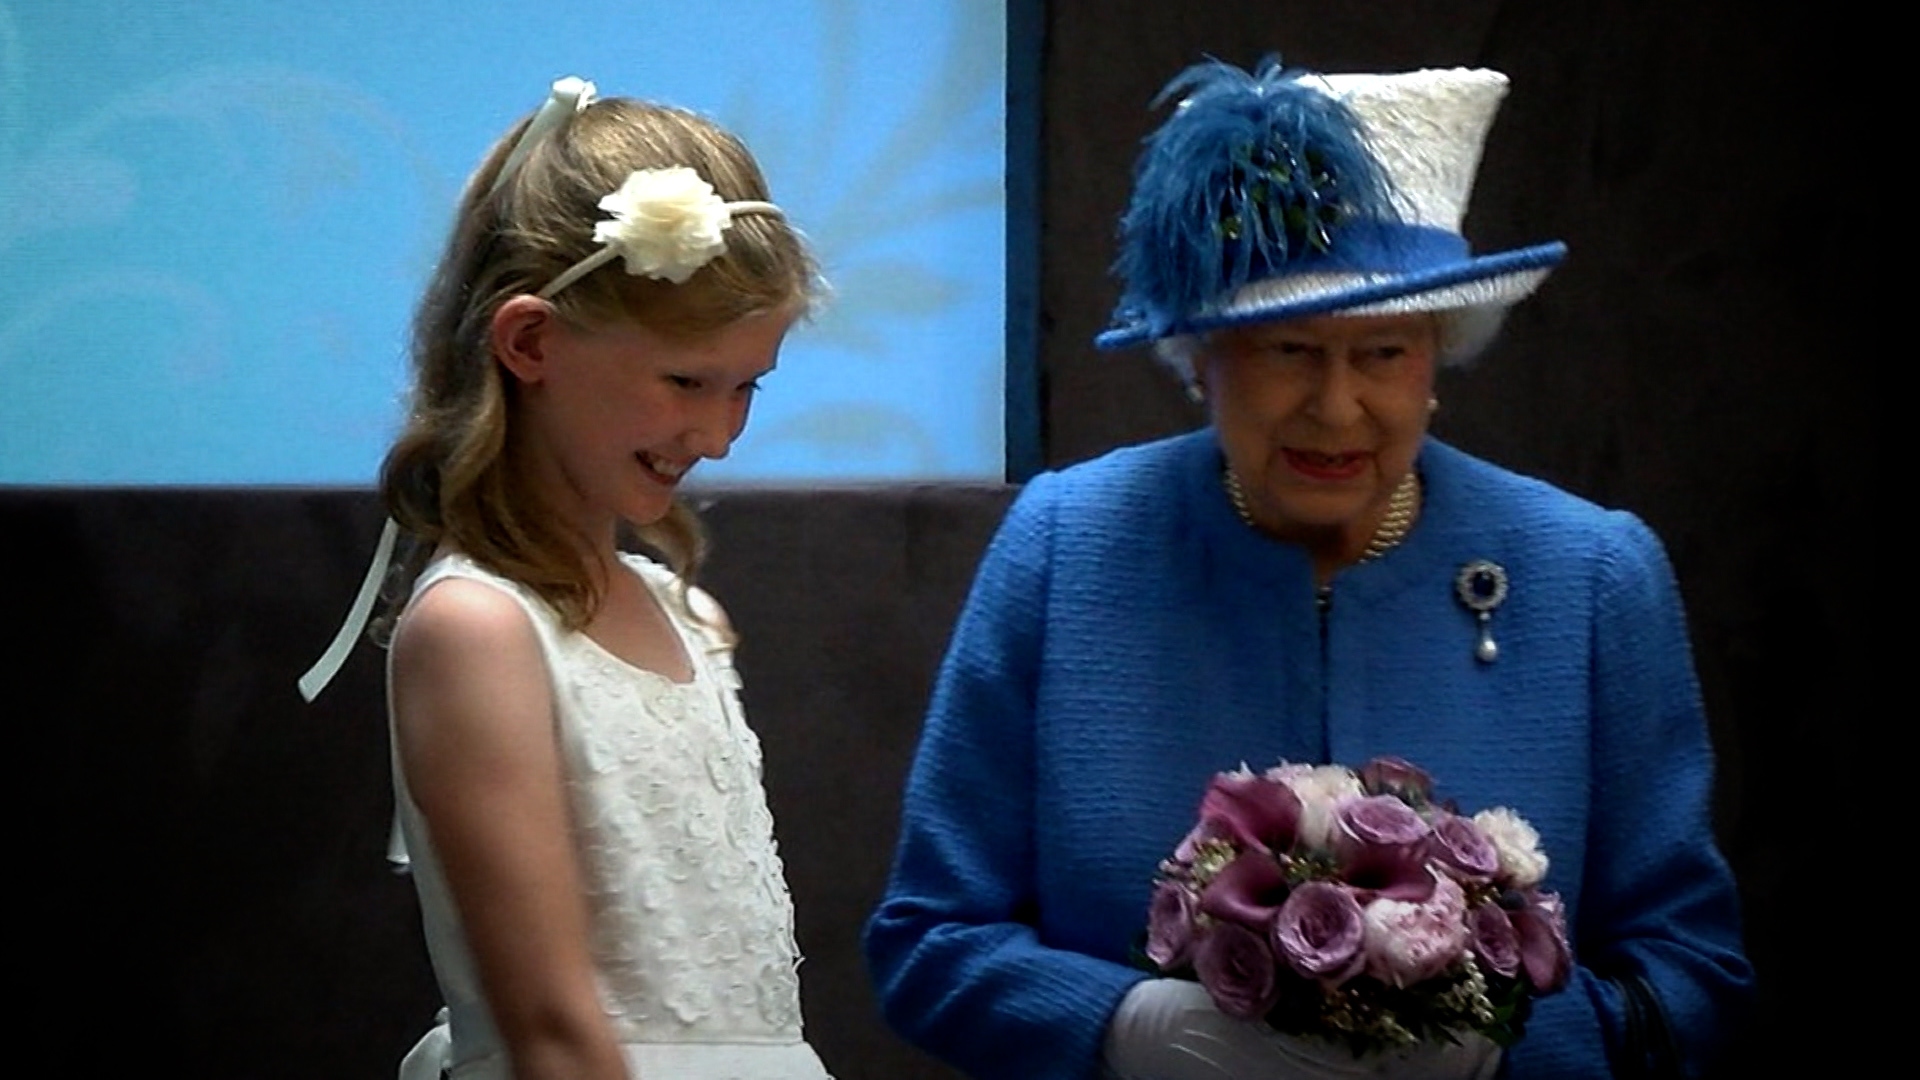 Amy gives flowers to the Queen